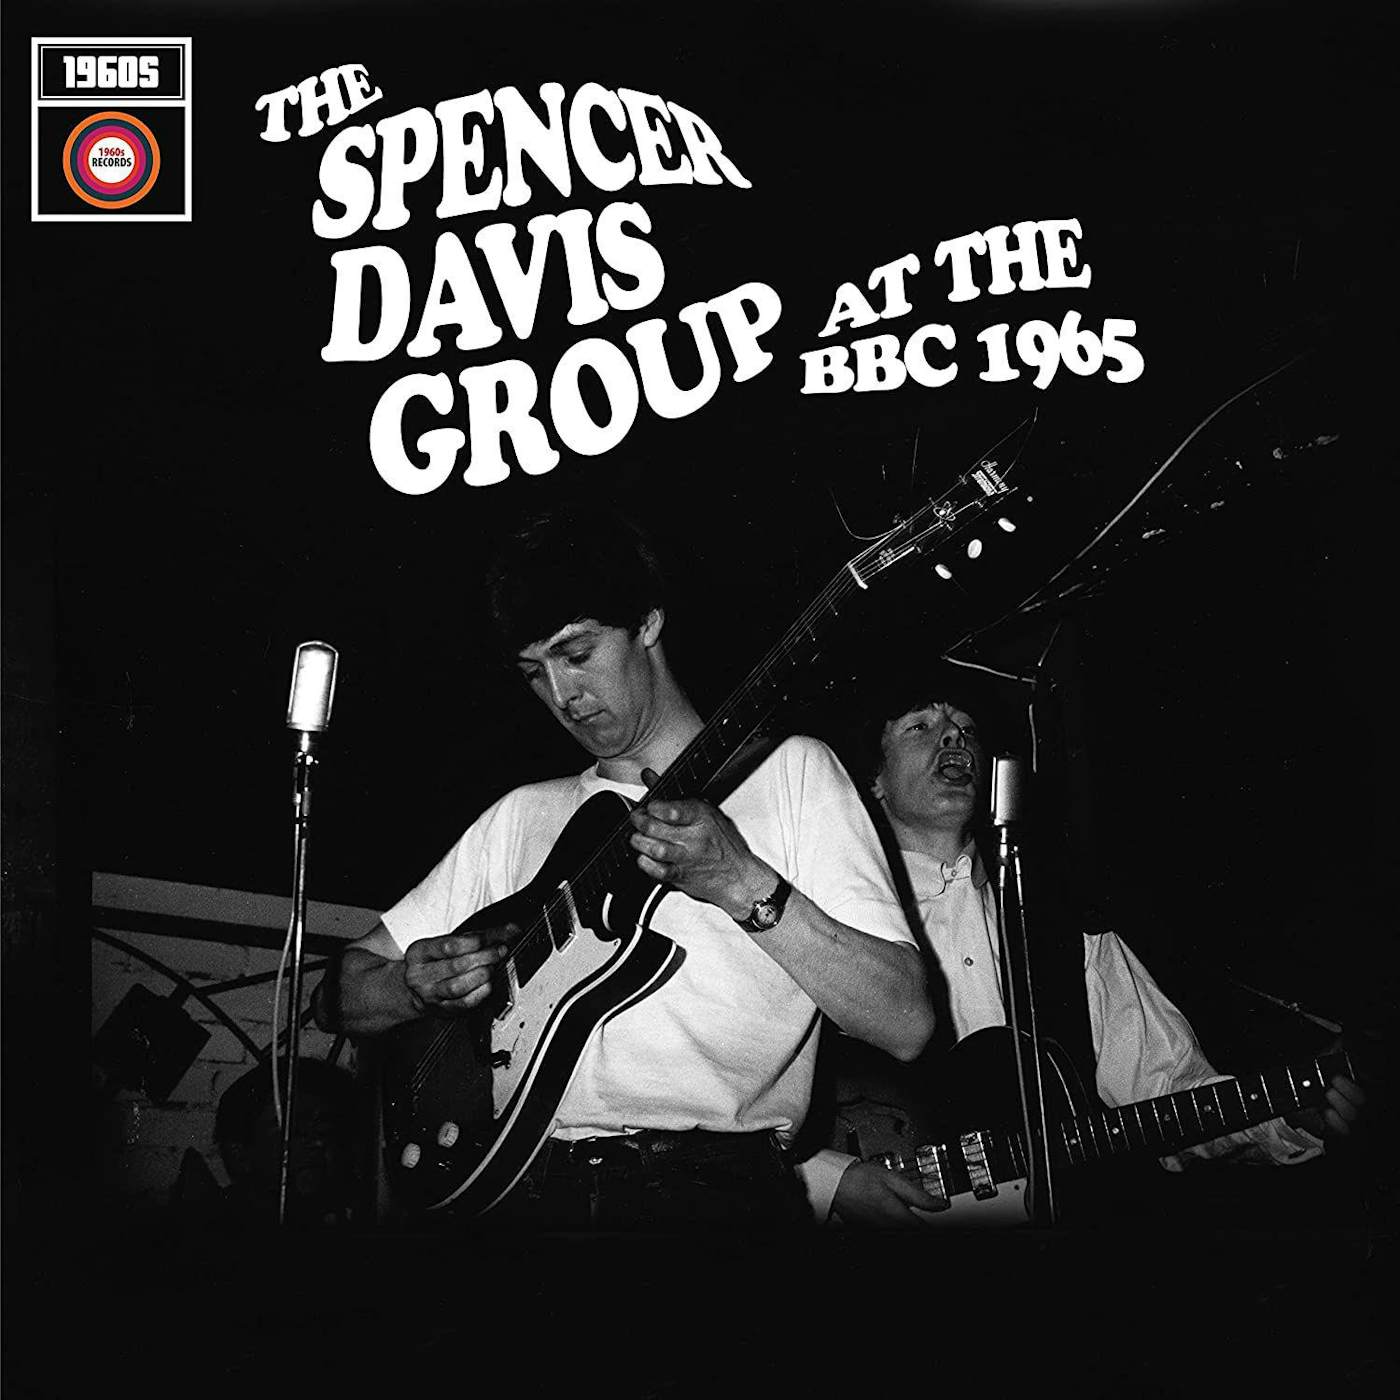 The Spencer Davis Group At The BBC 1965 Vinyl Record